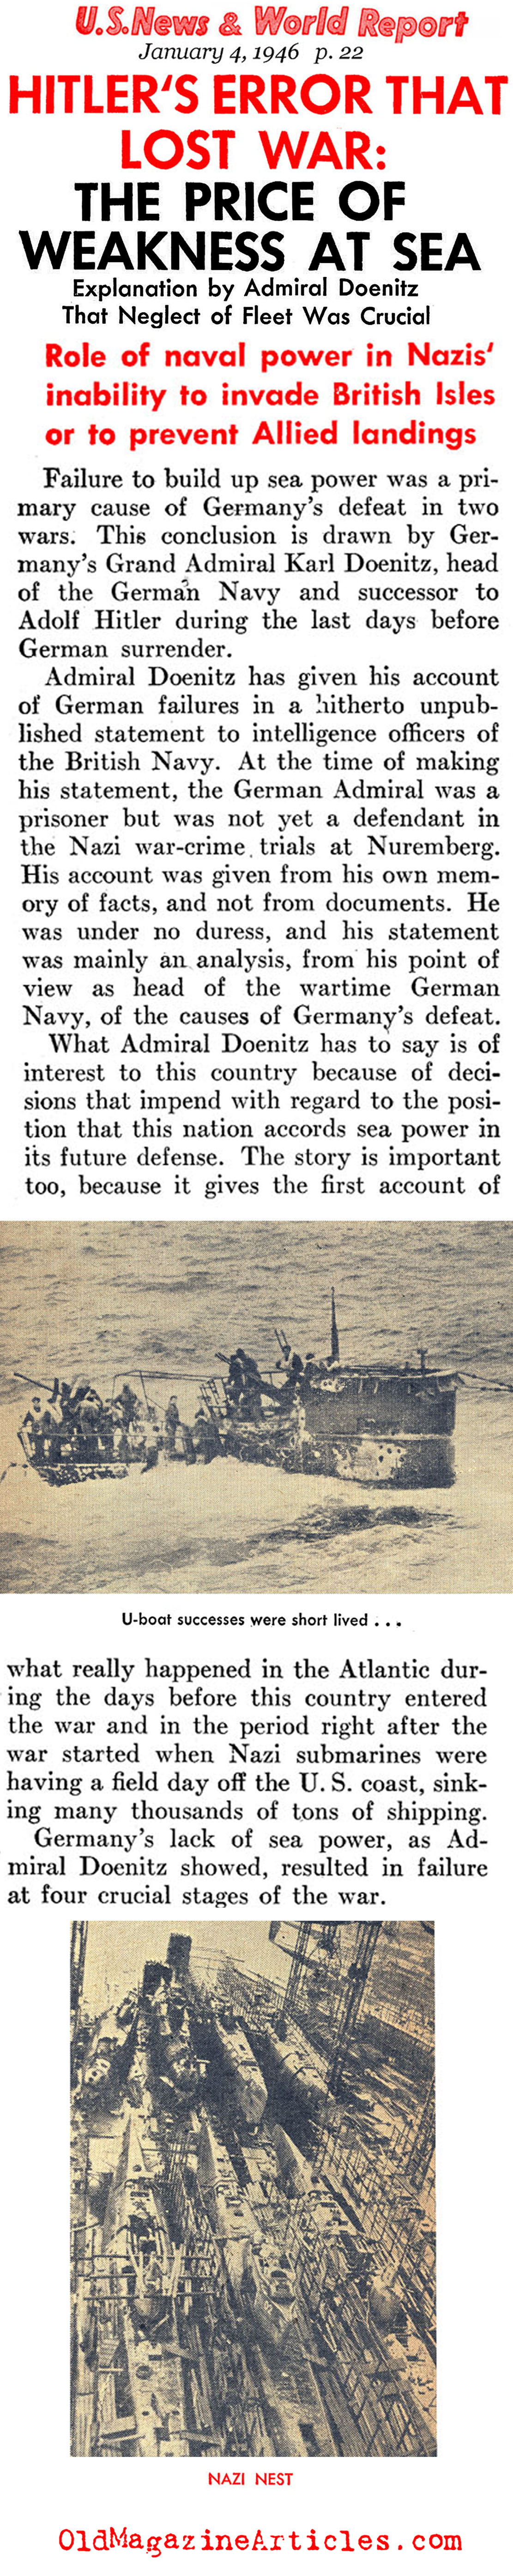 The Lack of German Naval Power (United States News, 1946)